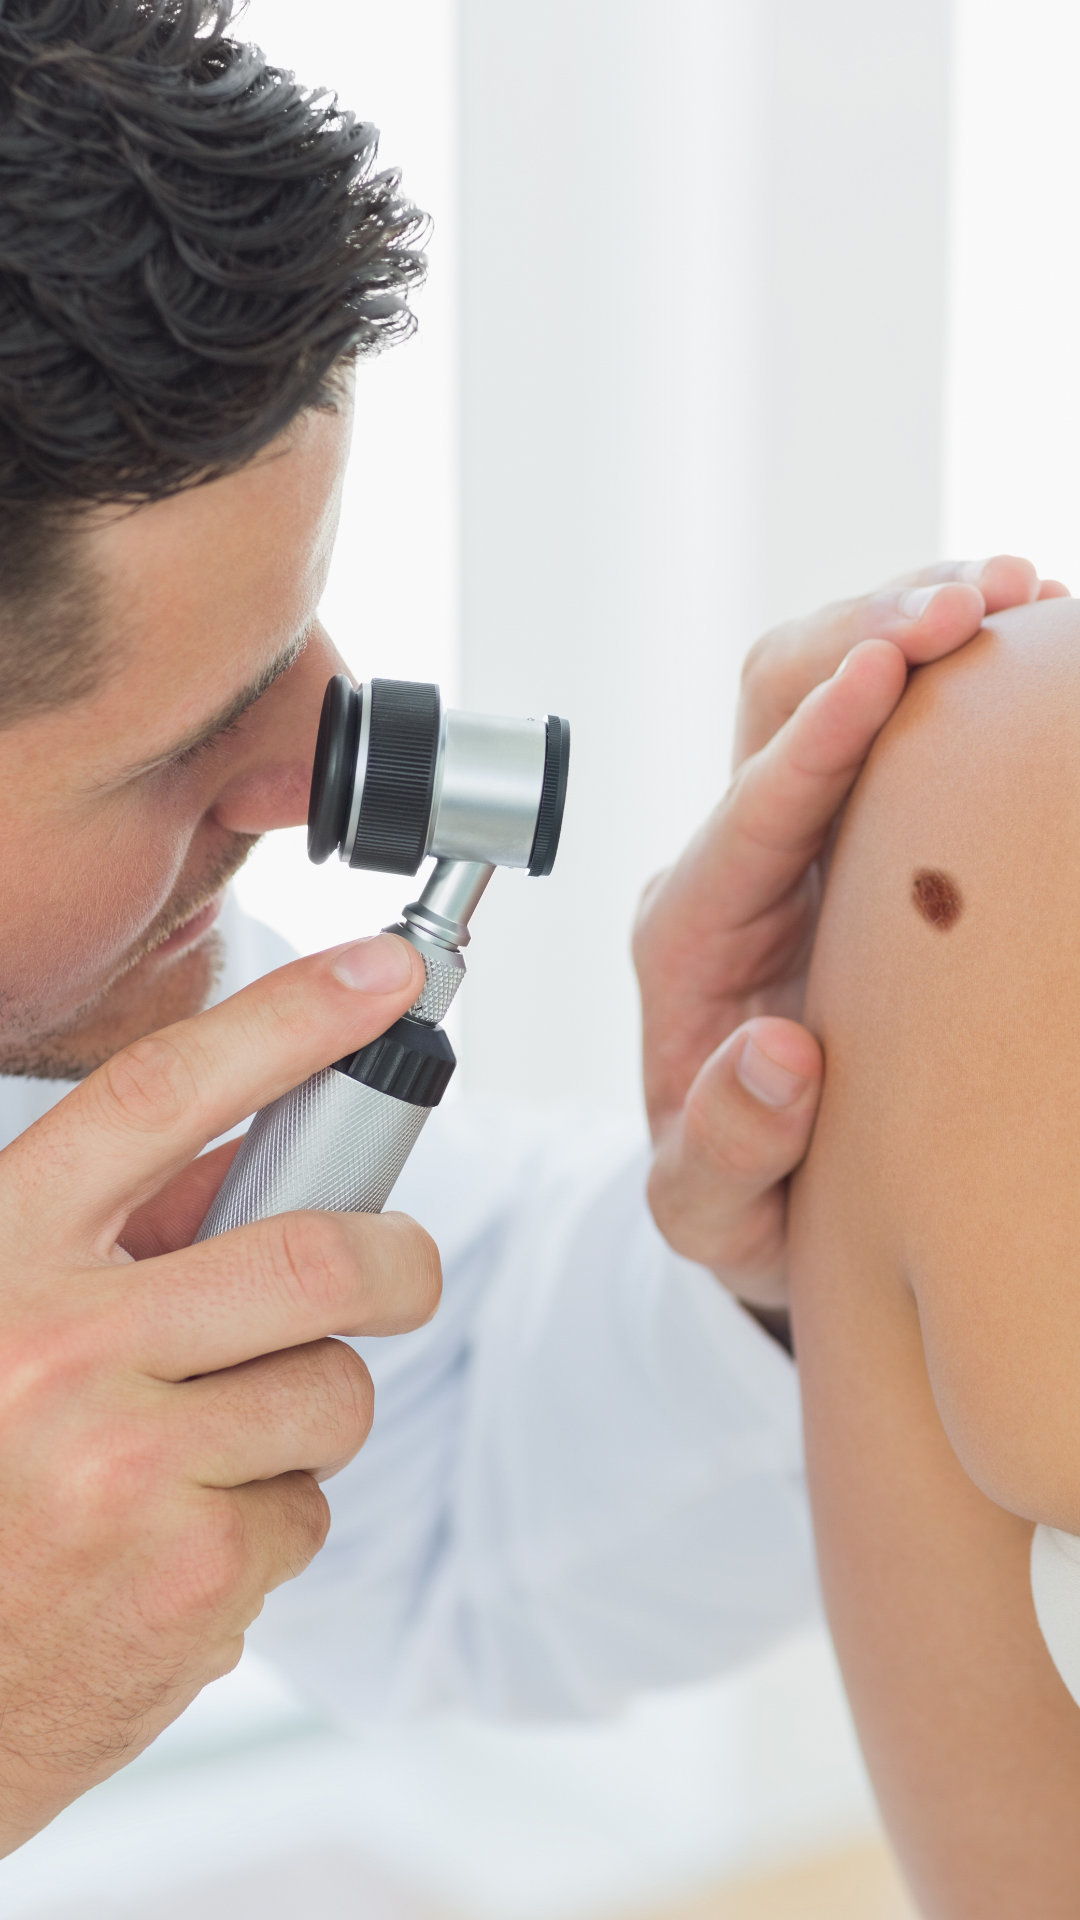 Skin cancer checks & removal: Skin cancer exams, Biopsies, Cryotherapy, Electrocautery, Surgical excision